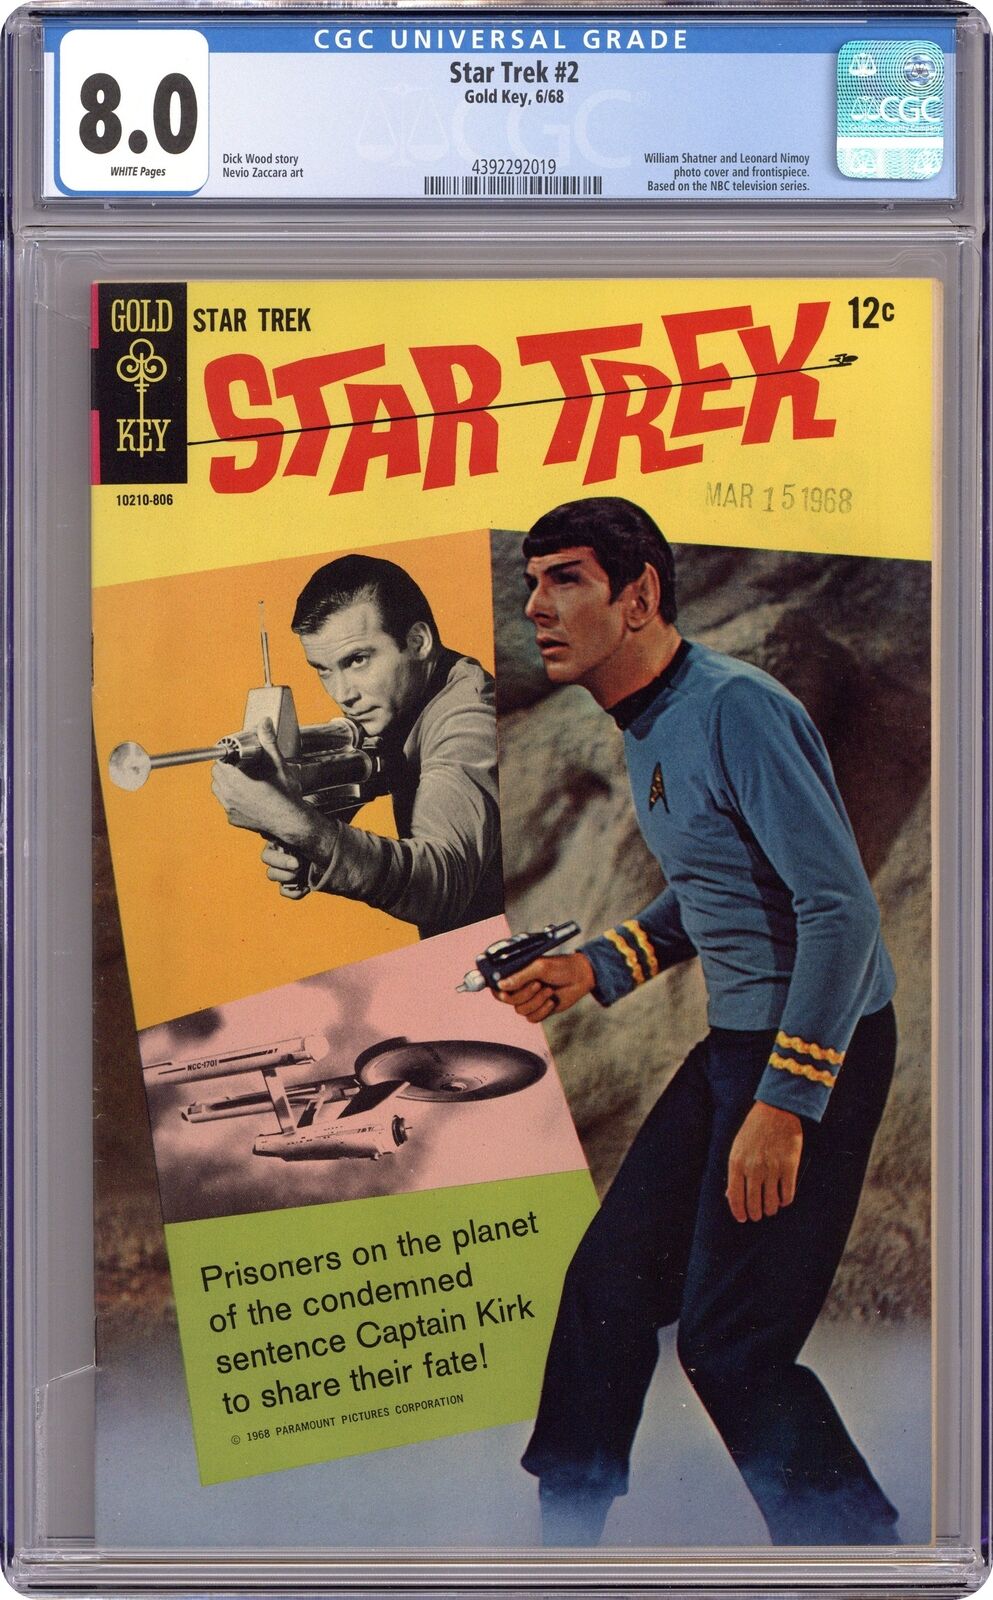 Star Trek #2A Ad Back Cover 12c Cover Price CGC 8.0 1968 4392292019